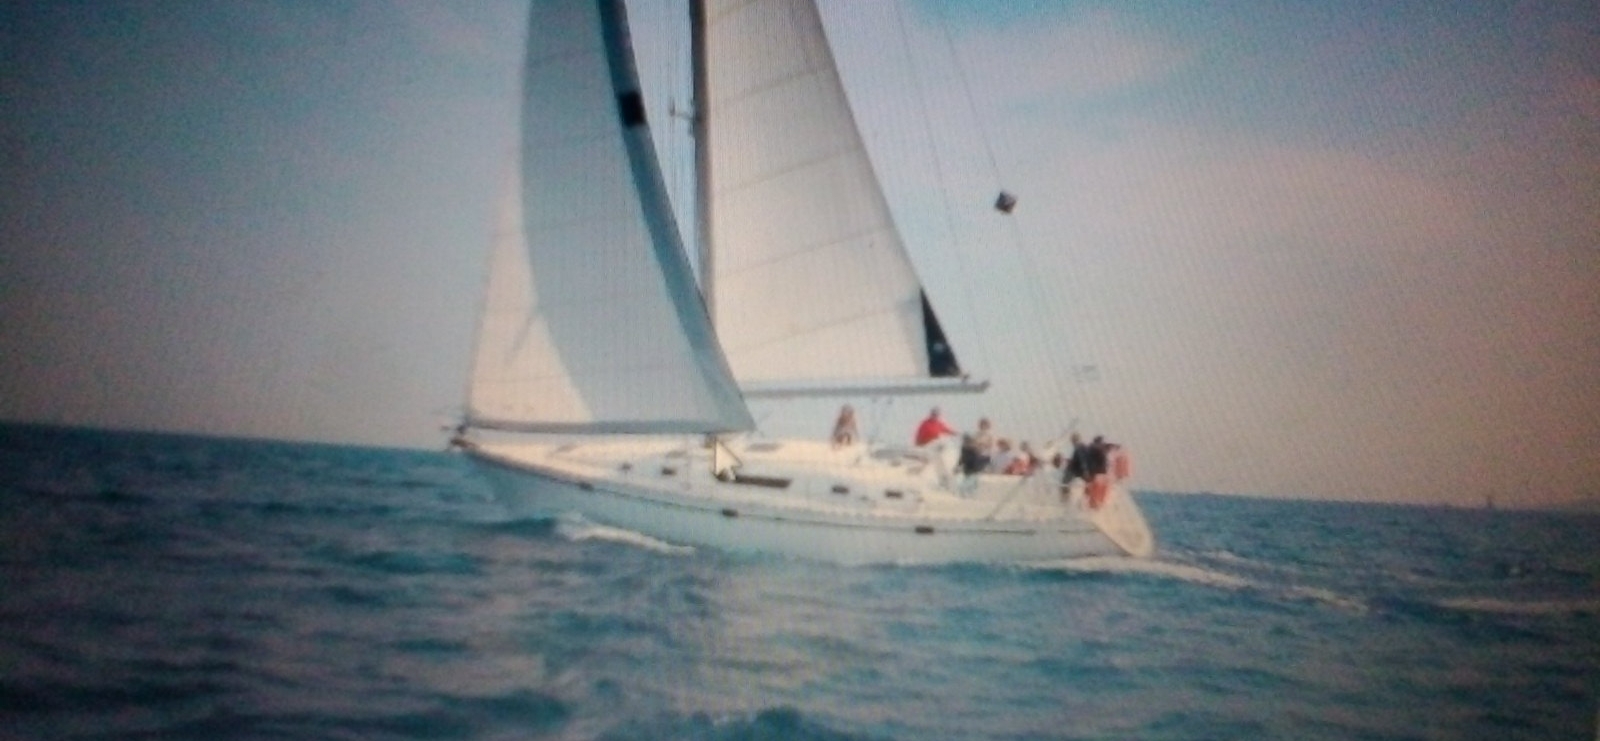 Sailing Trip in the Golfe of St-Tropez with Passion Marine Les Issambres